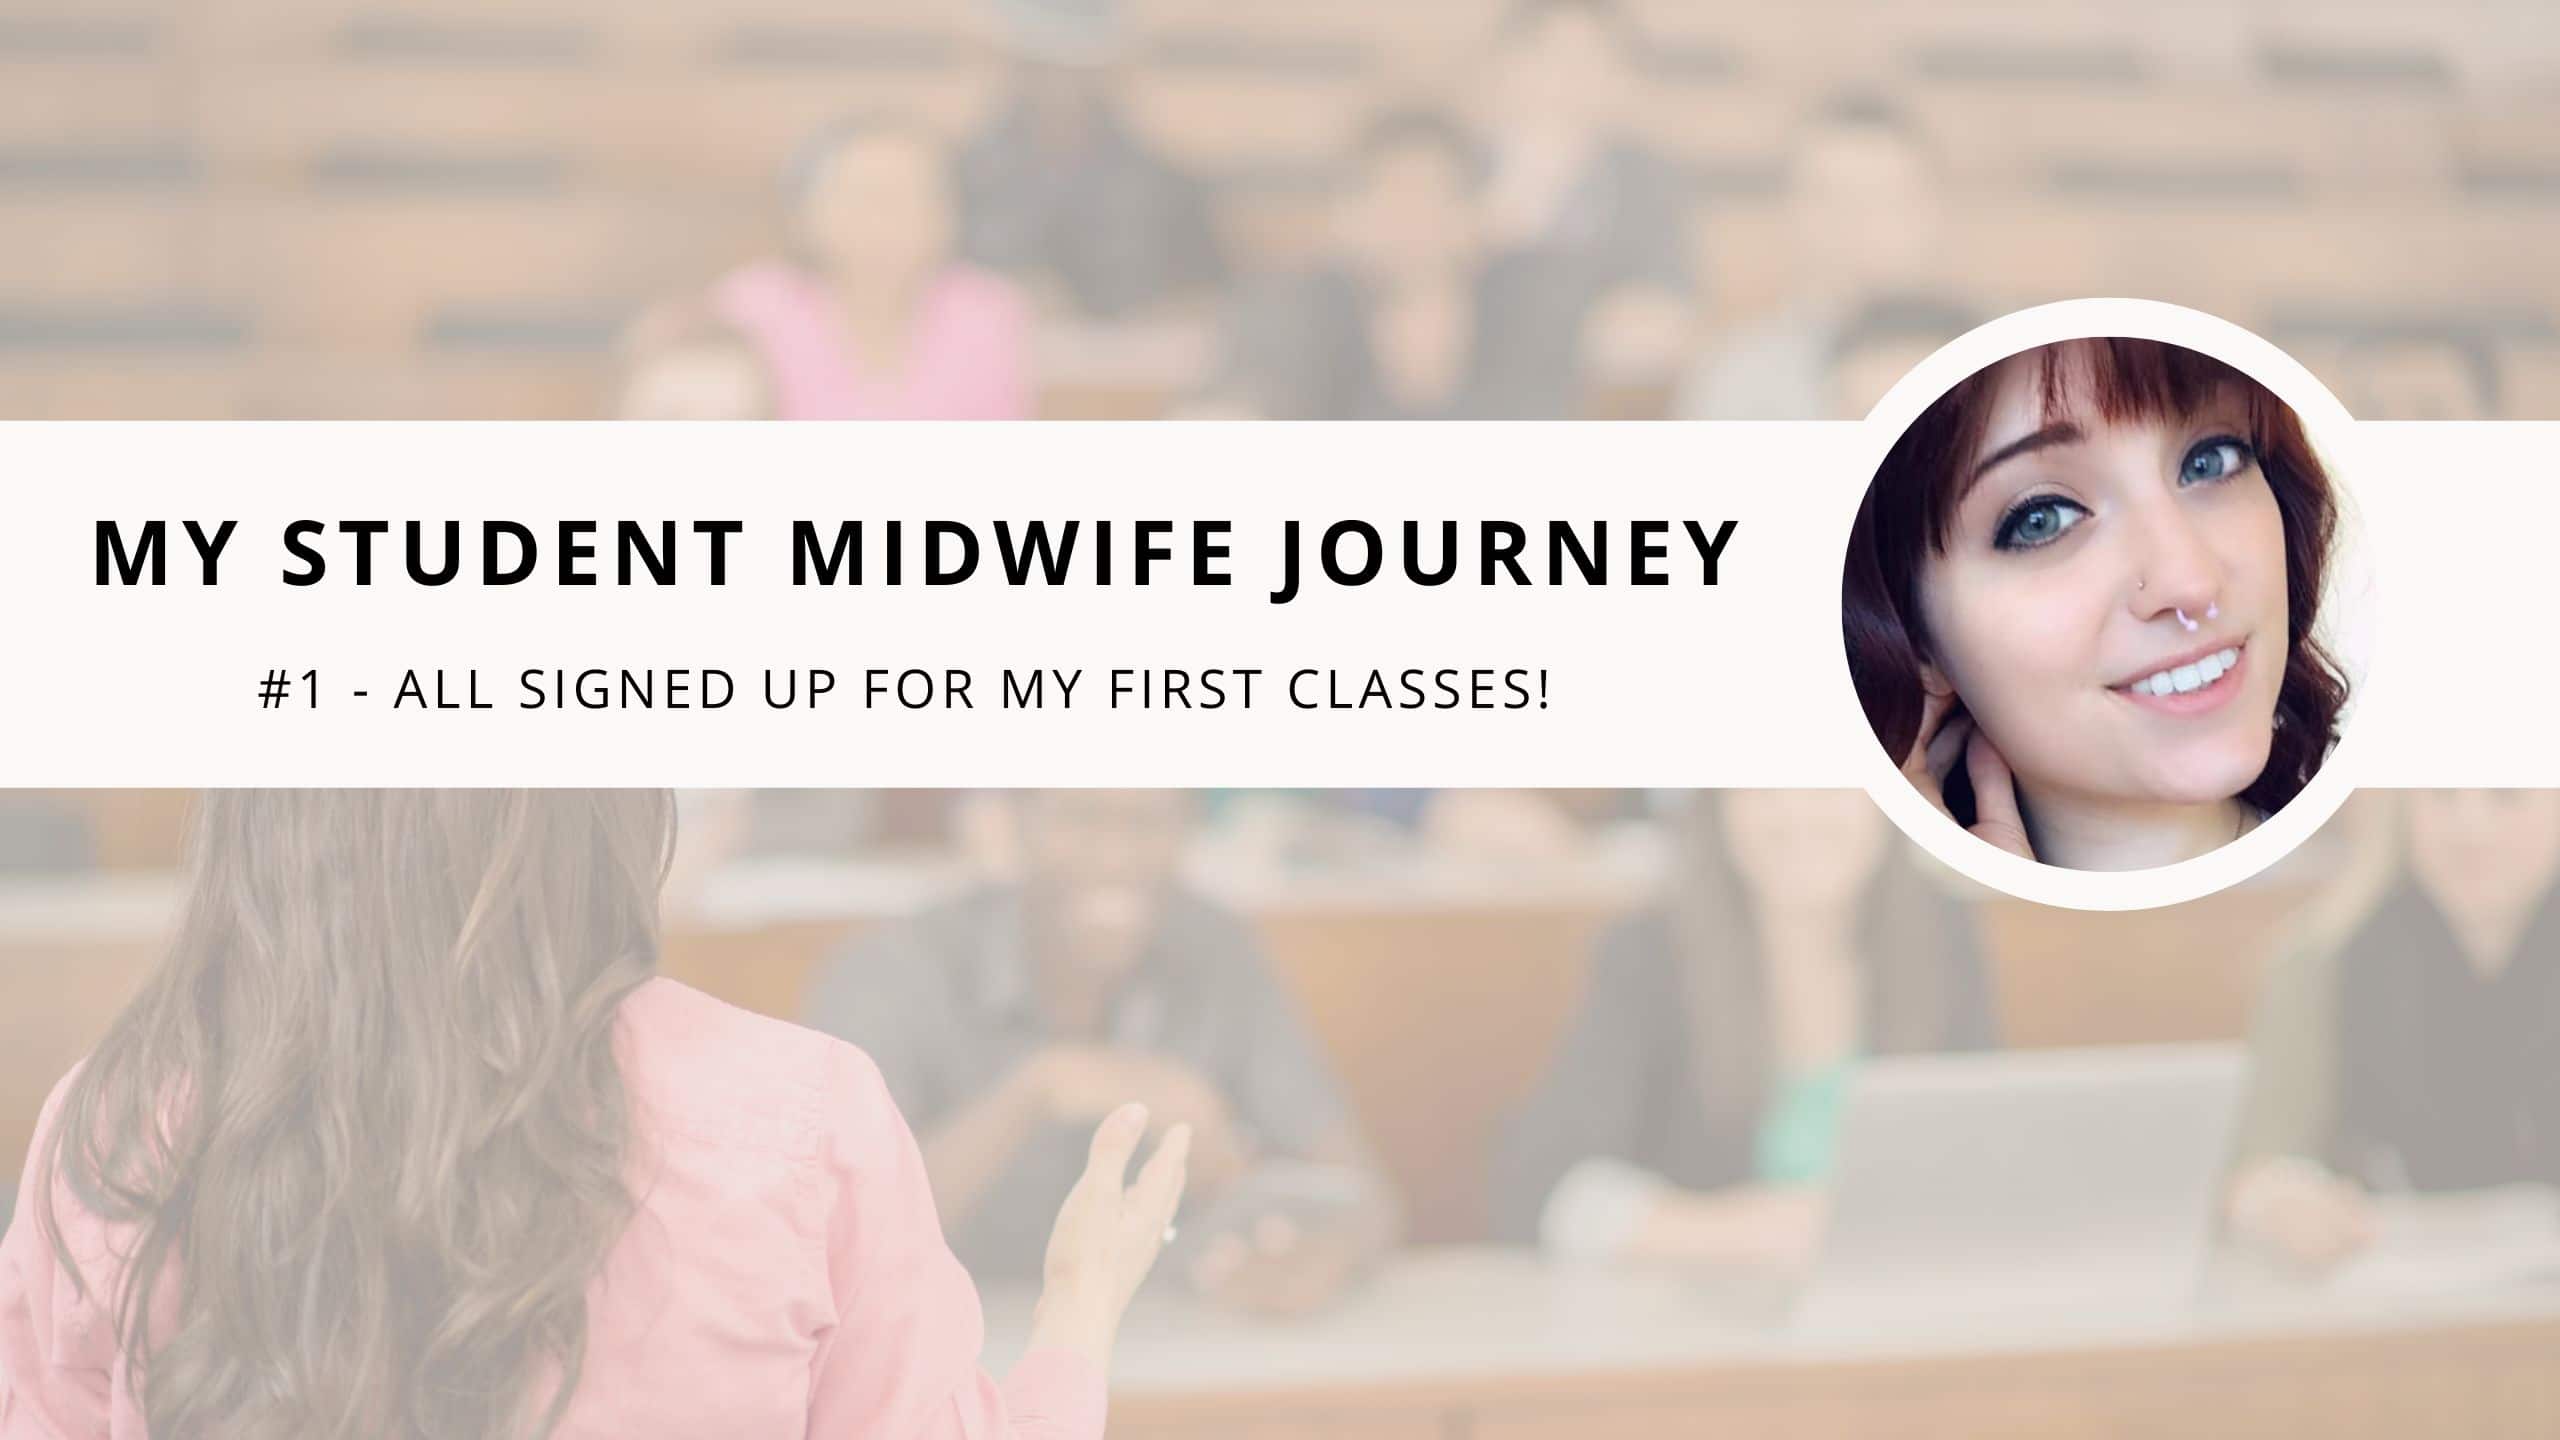 My student midwife journey Classes